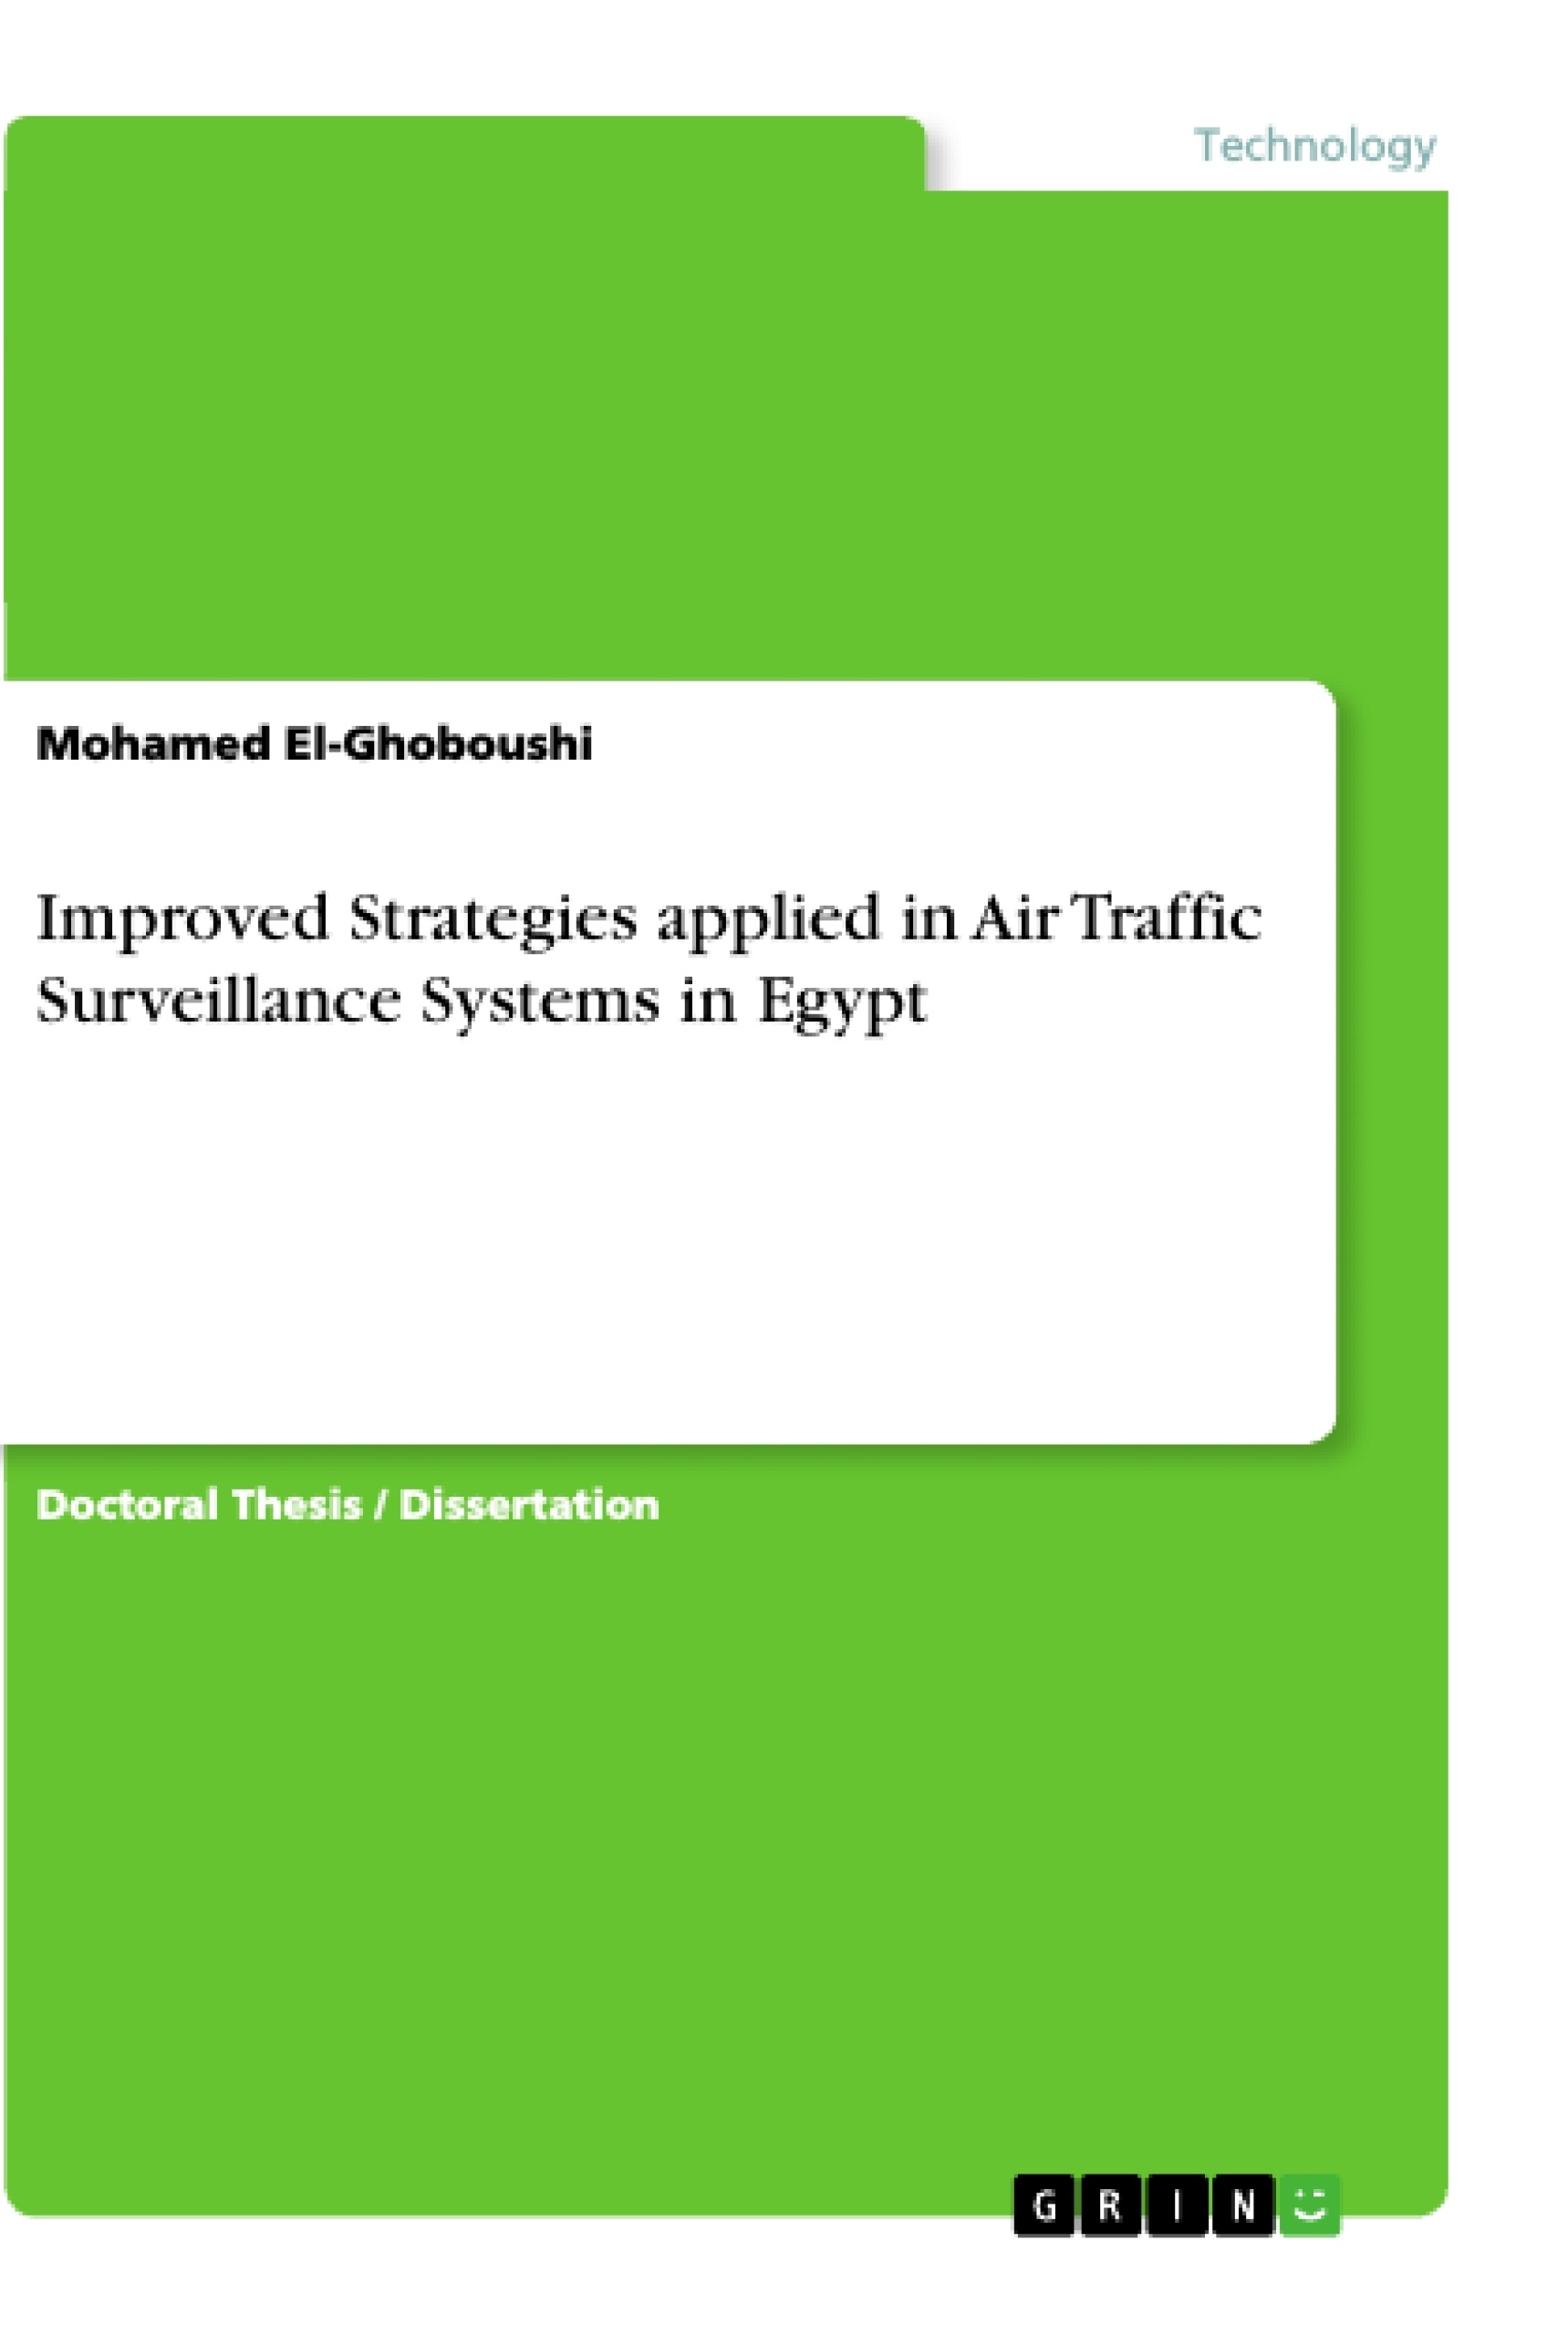 Title: Improved Strategies applied in Air Traffic Surveillance Systems in Egypt